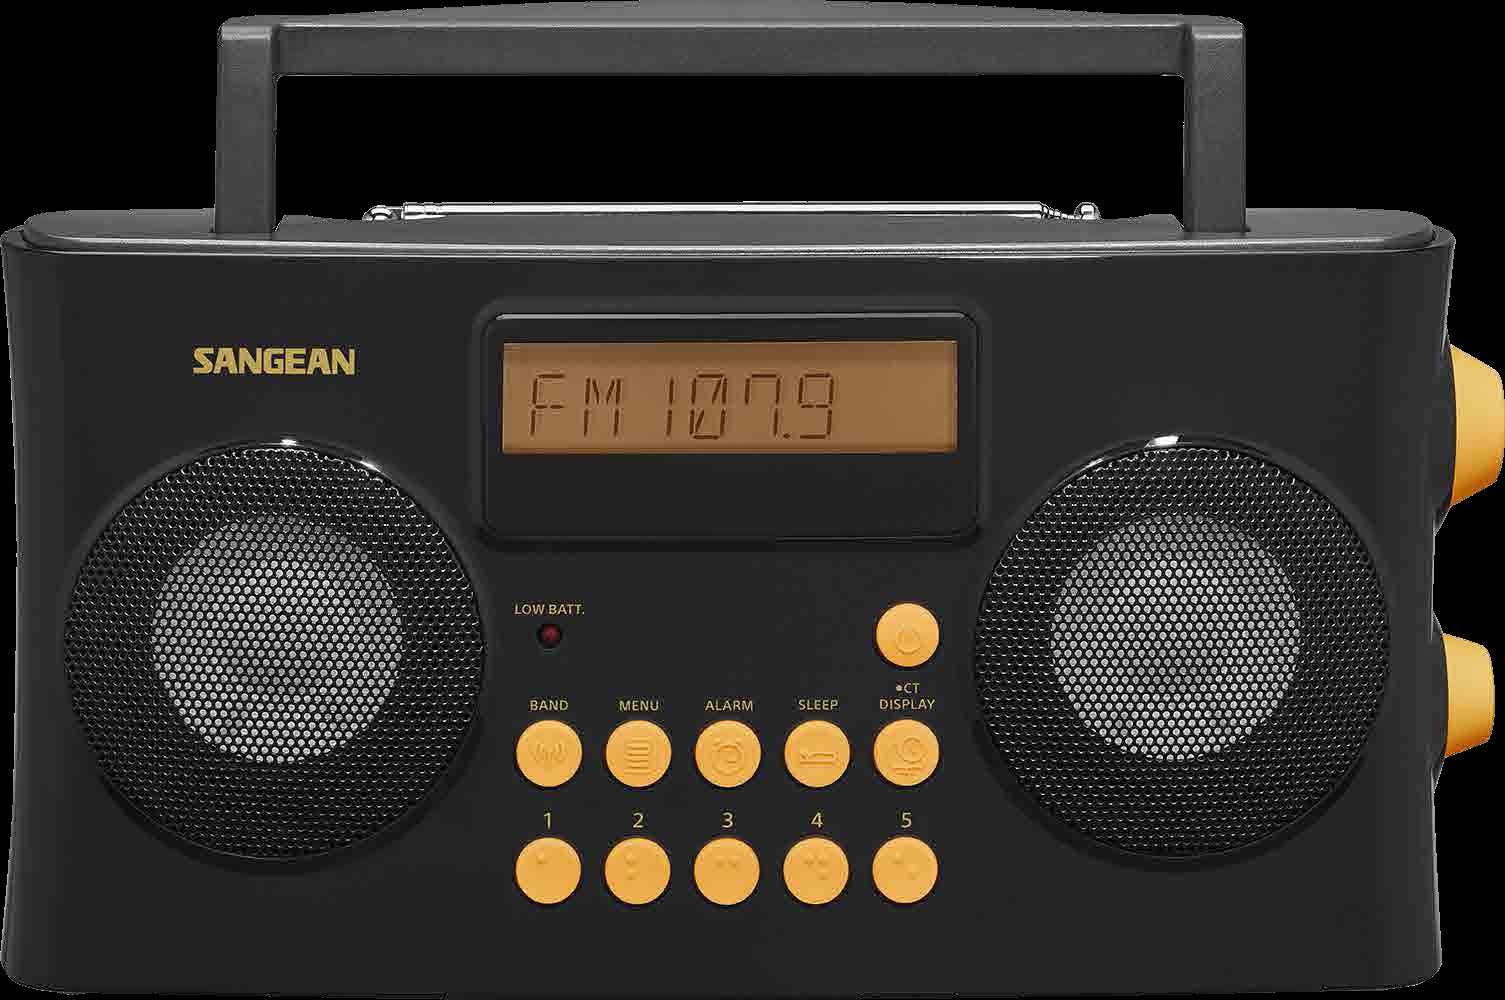 Sangean-PR-D17 AM / FM-RDS Portable Radio Specially Designed for the Visually Impaired with Helpful Guided Voice Prompts-eSafety Supplies, Inc